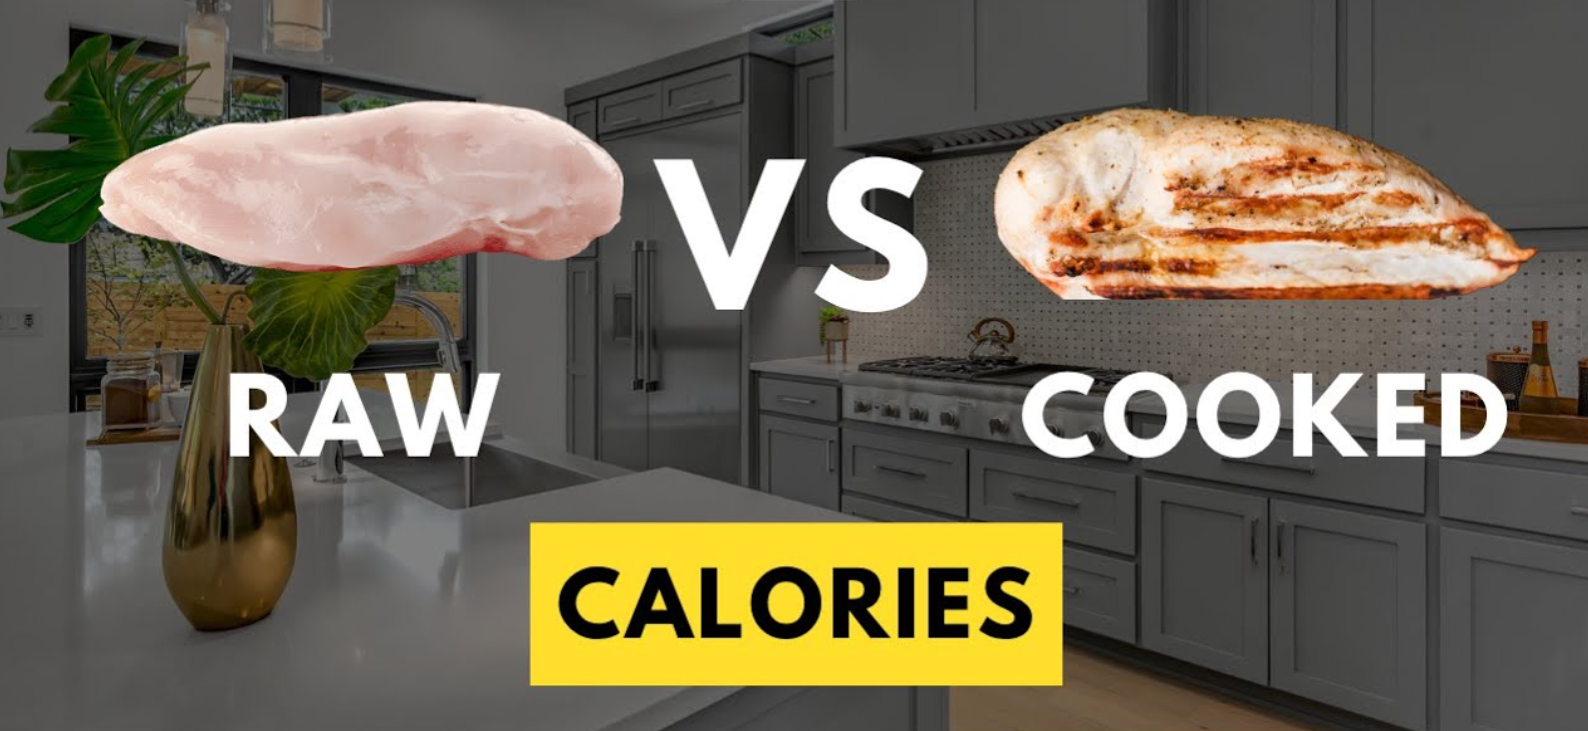 chicken lose calories when cooked